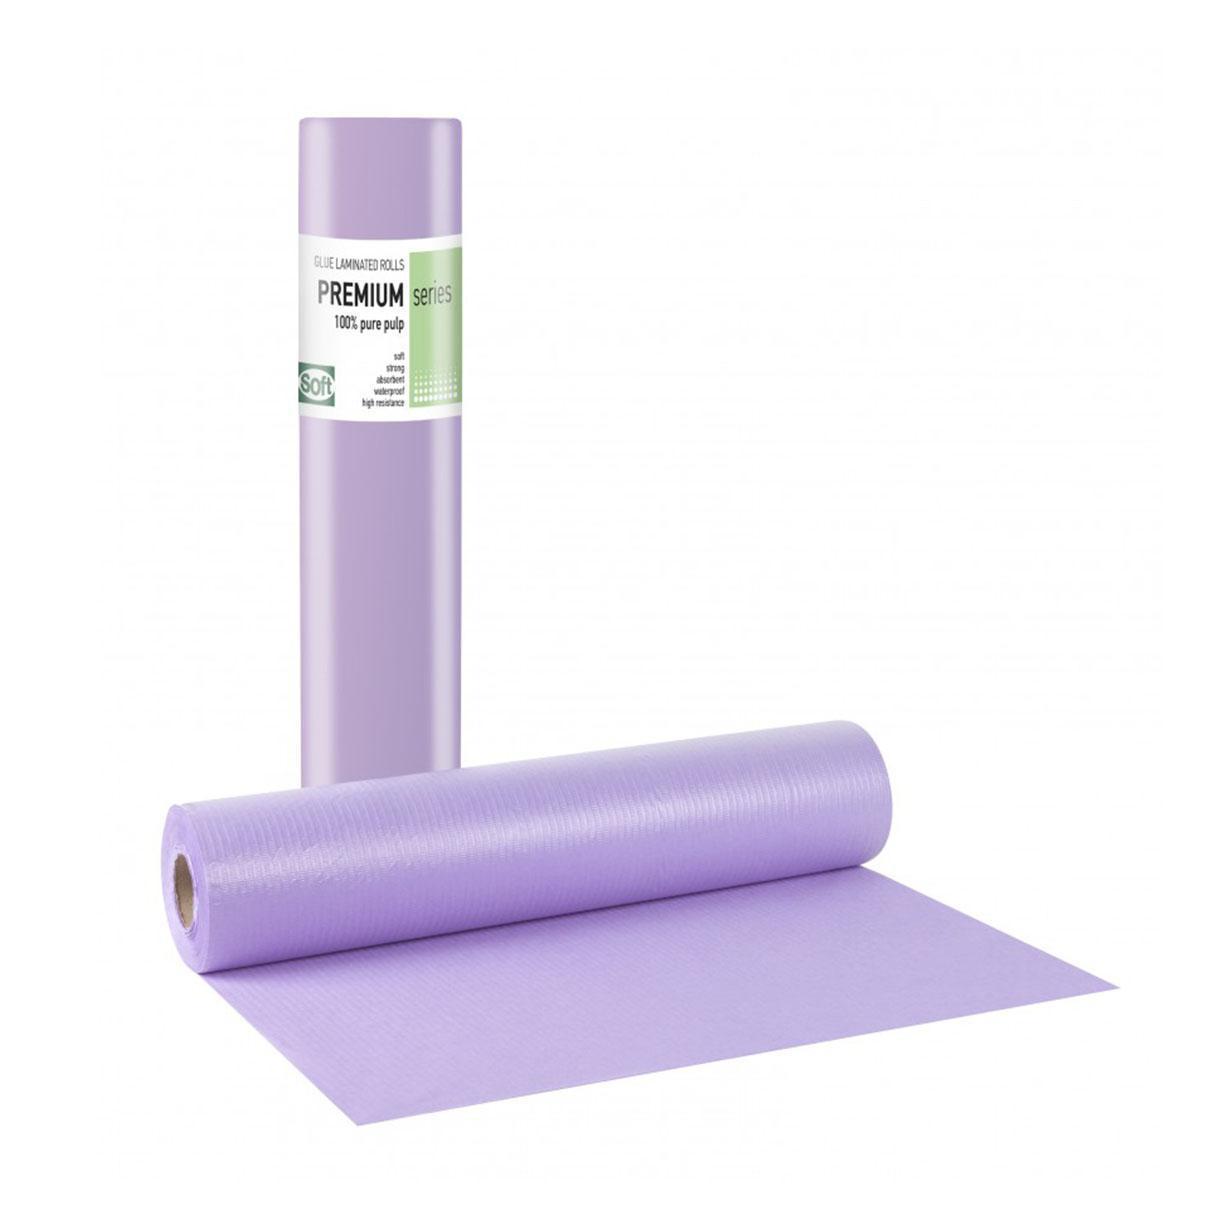 Laminated paper roll with glue Accessories